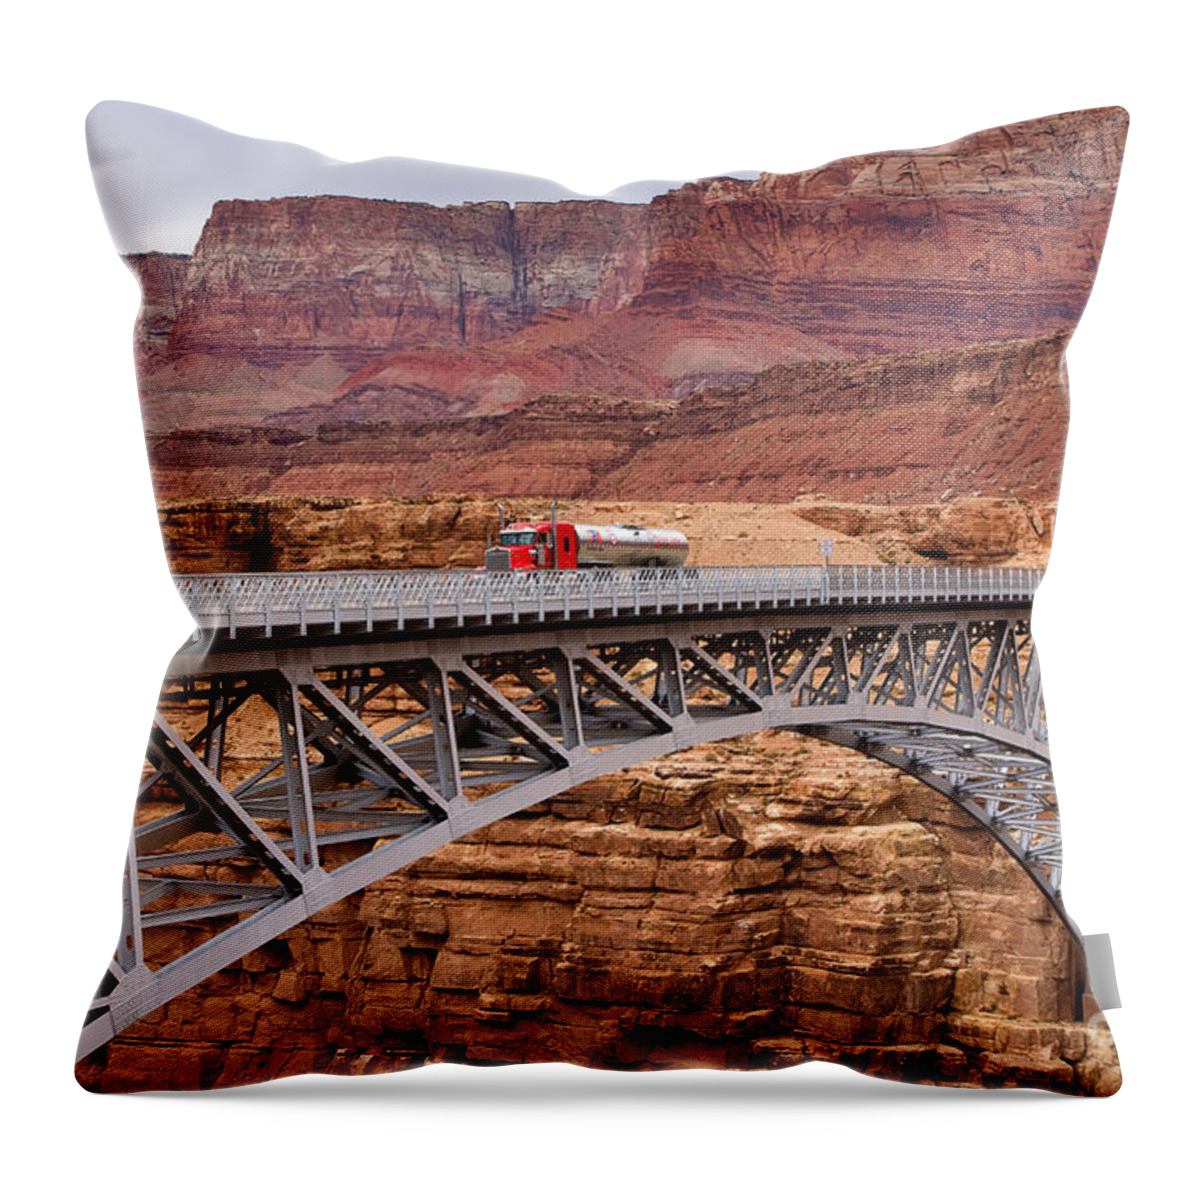 Travel Throw Pillow featuring the photograph Navajo Bridge by Louise Heusinkveld